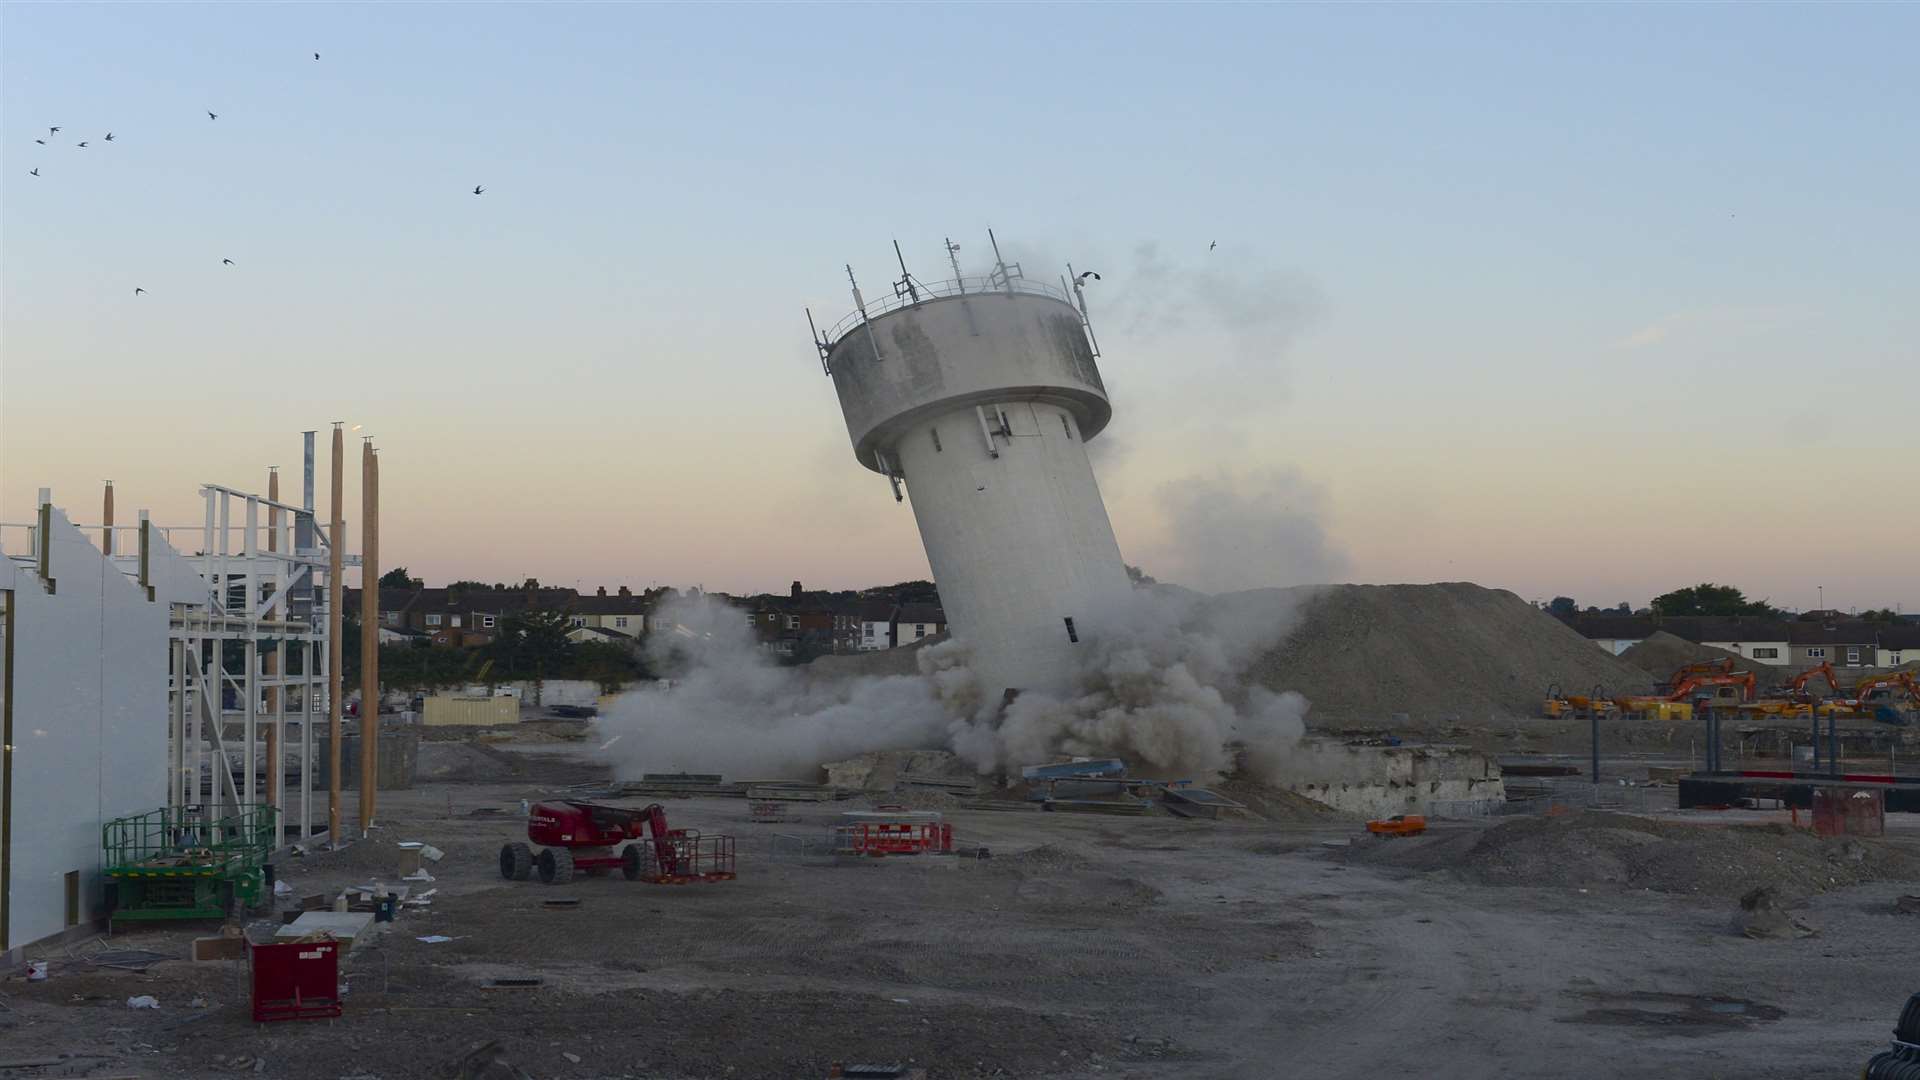 The former Bowaters water tower on the Sittingbourne paper mill site was demolished in September 2012.